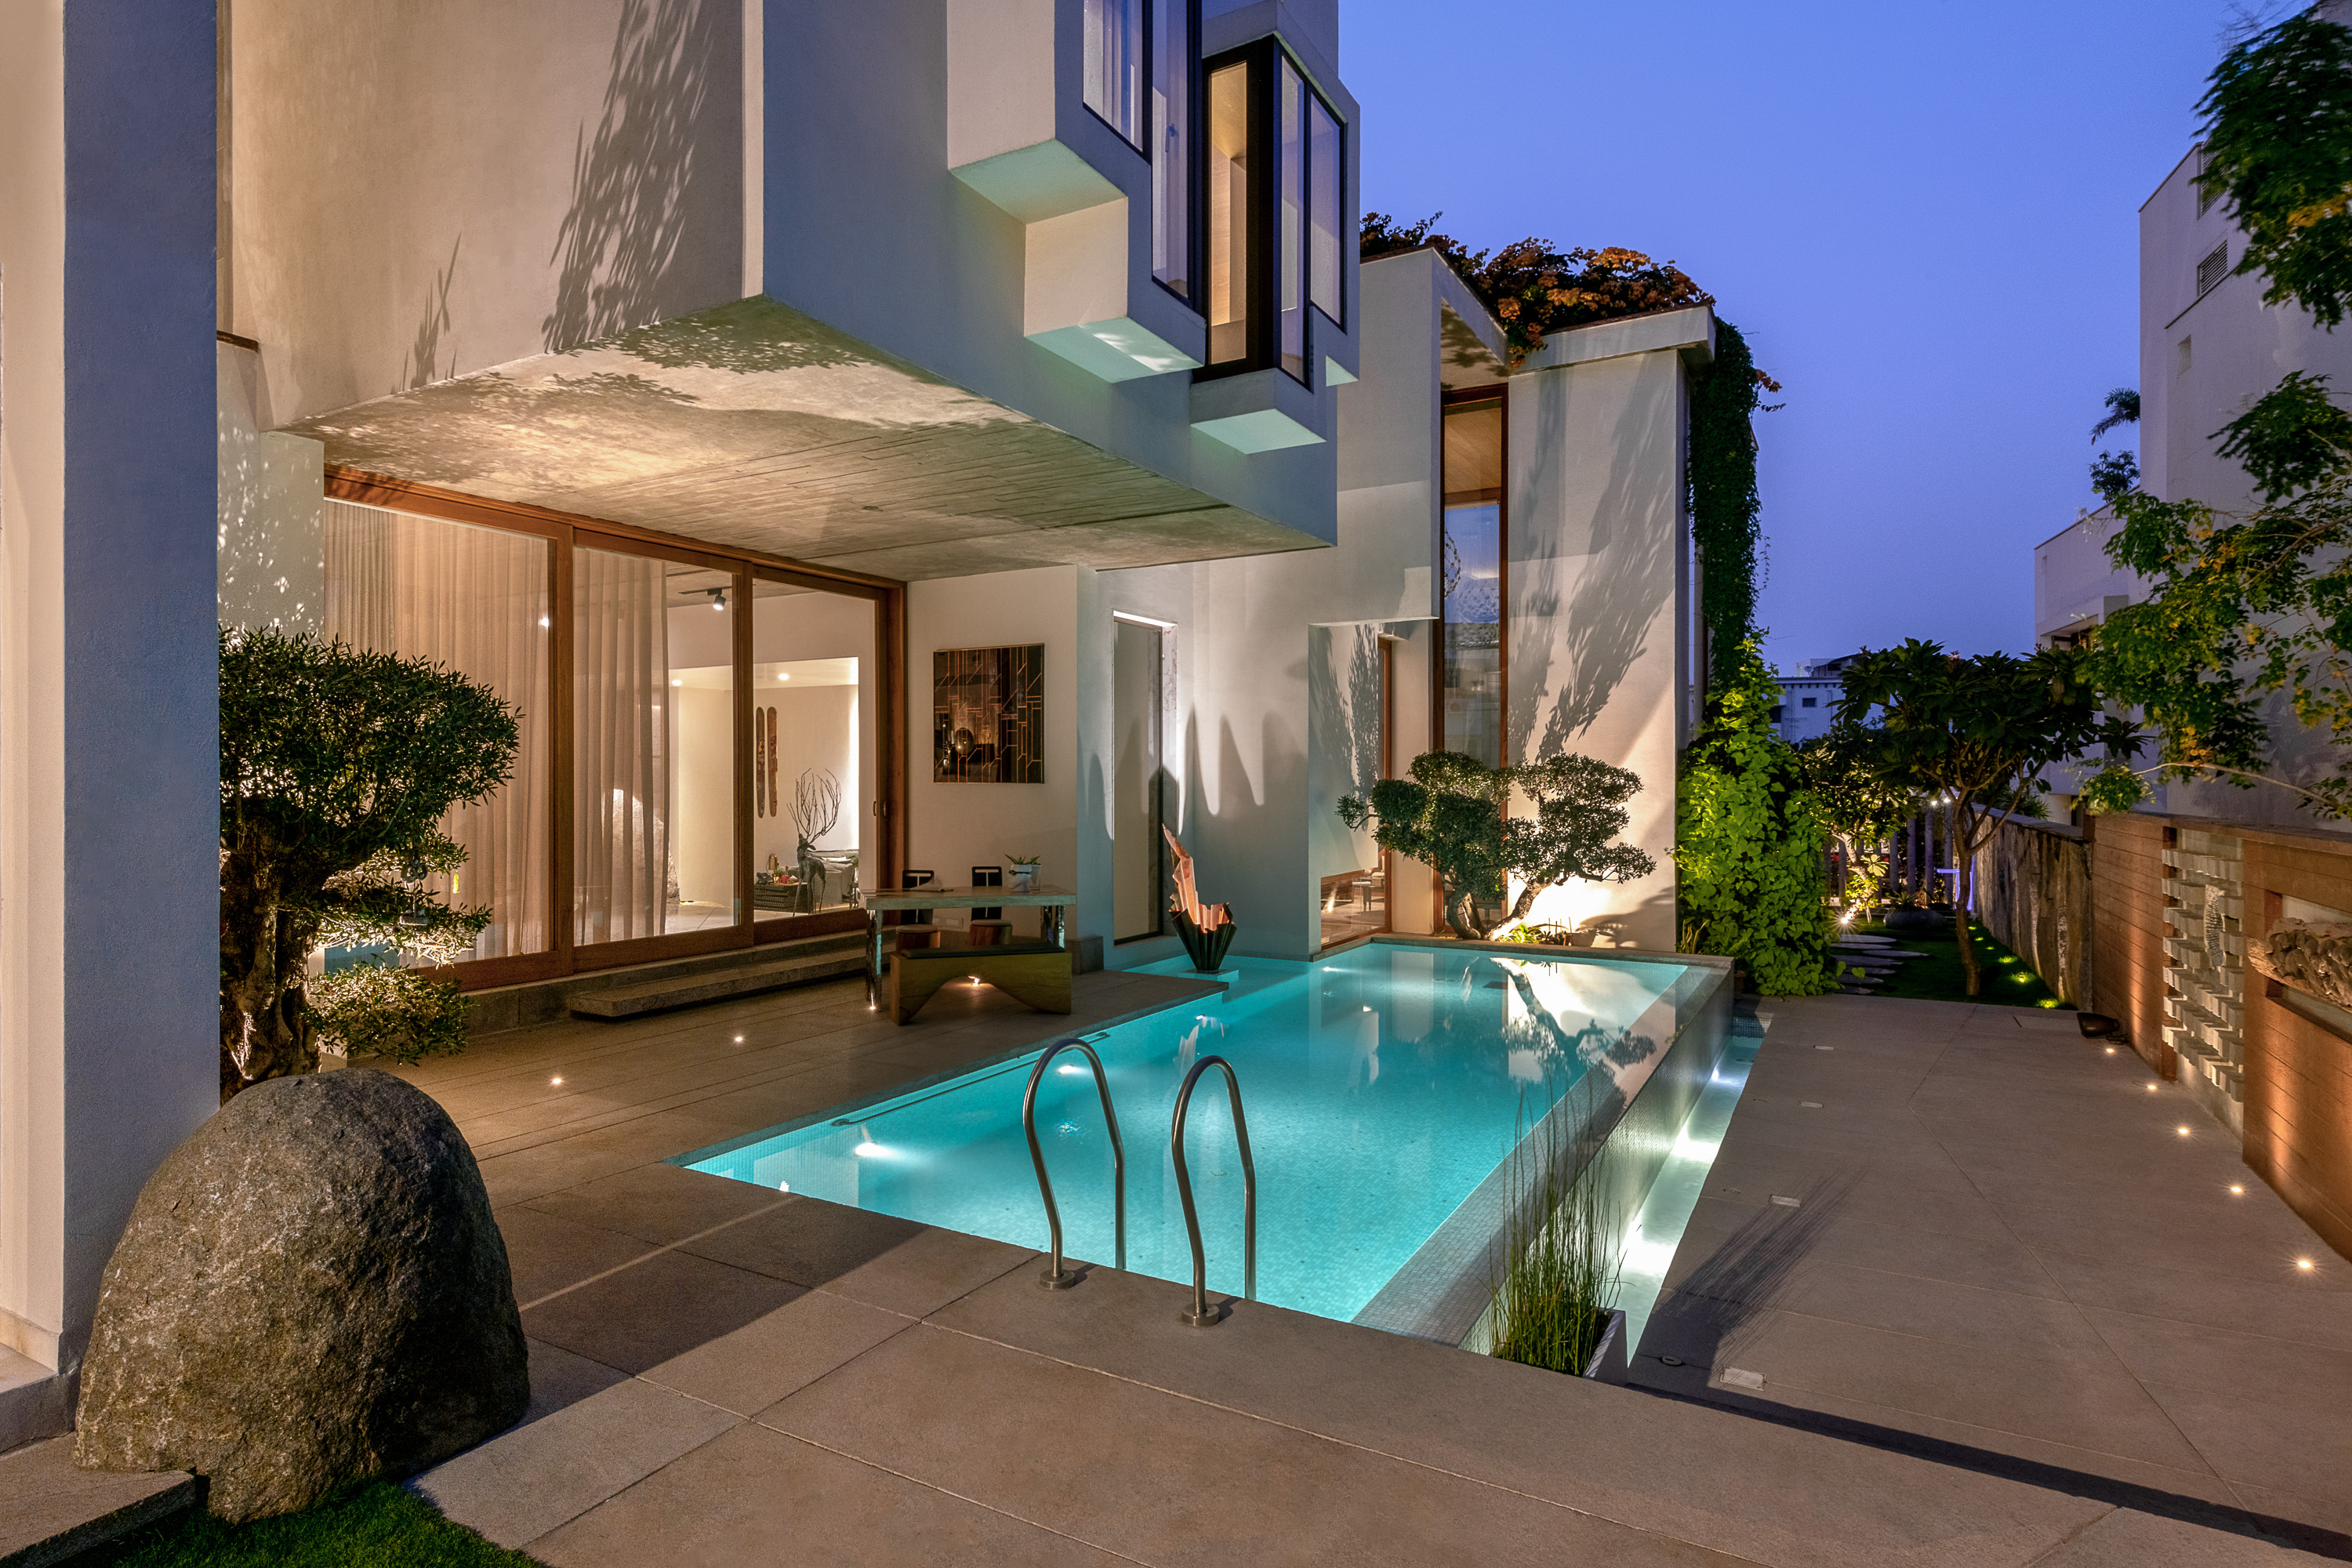 Sustainability Meets Luxury In This Private Residence by NA Architects na architects NA Architects Design A Private Residence Where Copper Hues Reign HRE PHX4357 luxury outdoor Amazing Pools That Epitomize Your Luxury Outdoor Living at Its Finest HRE PHX4357